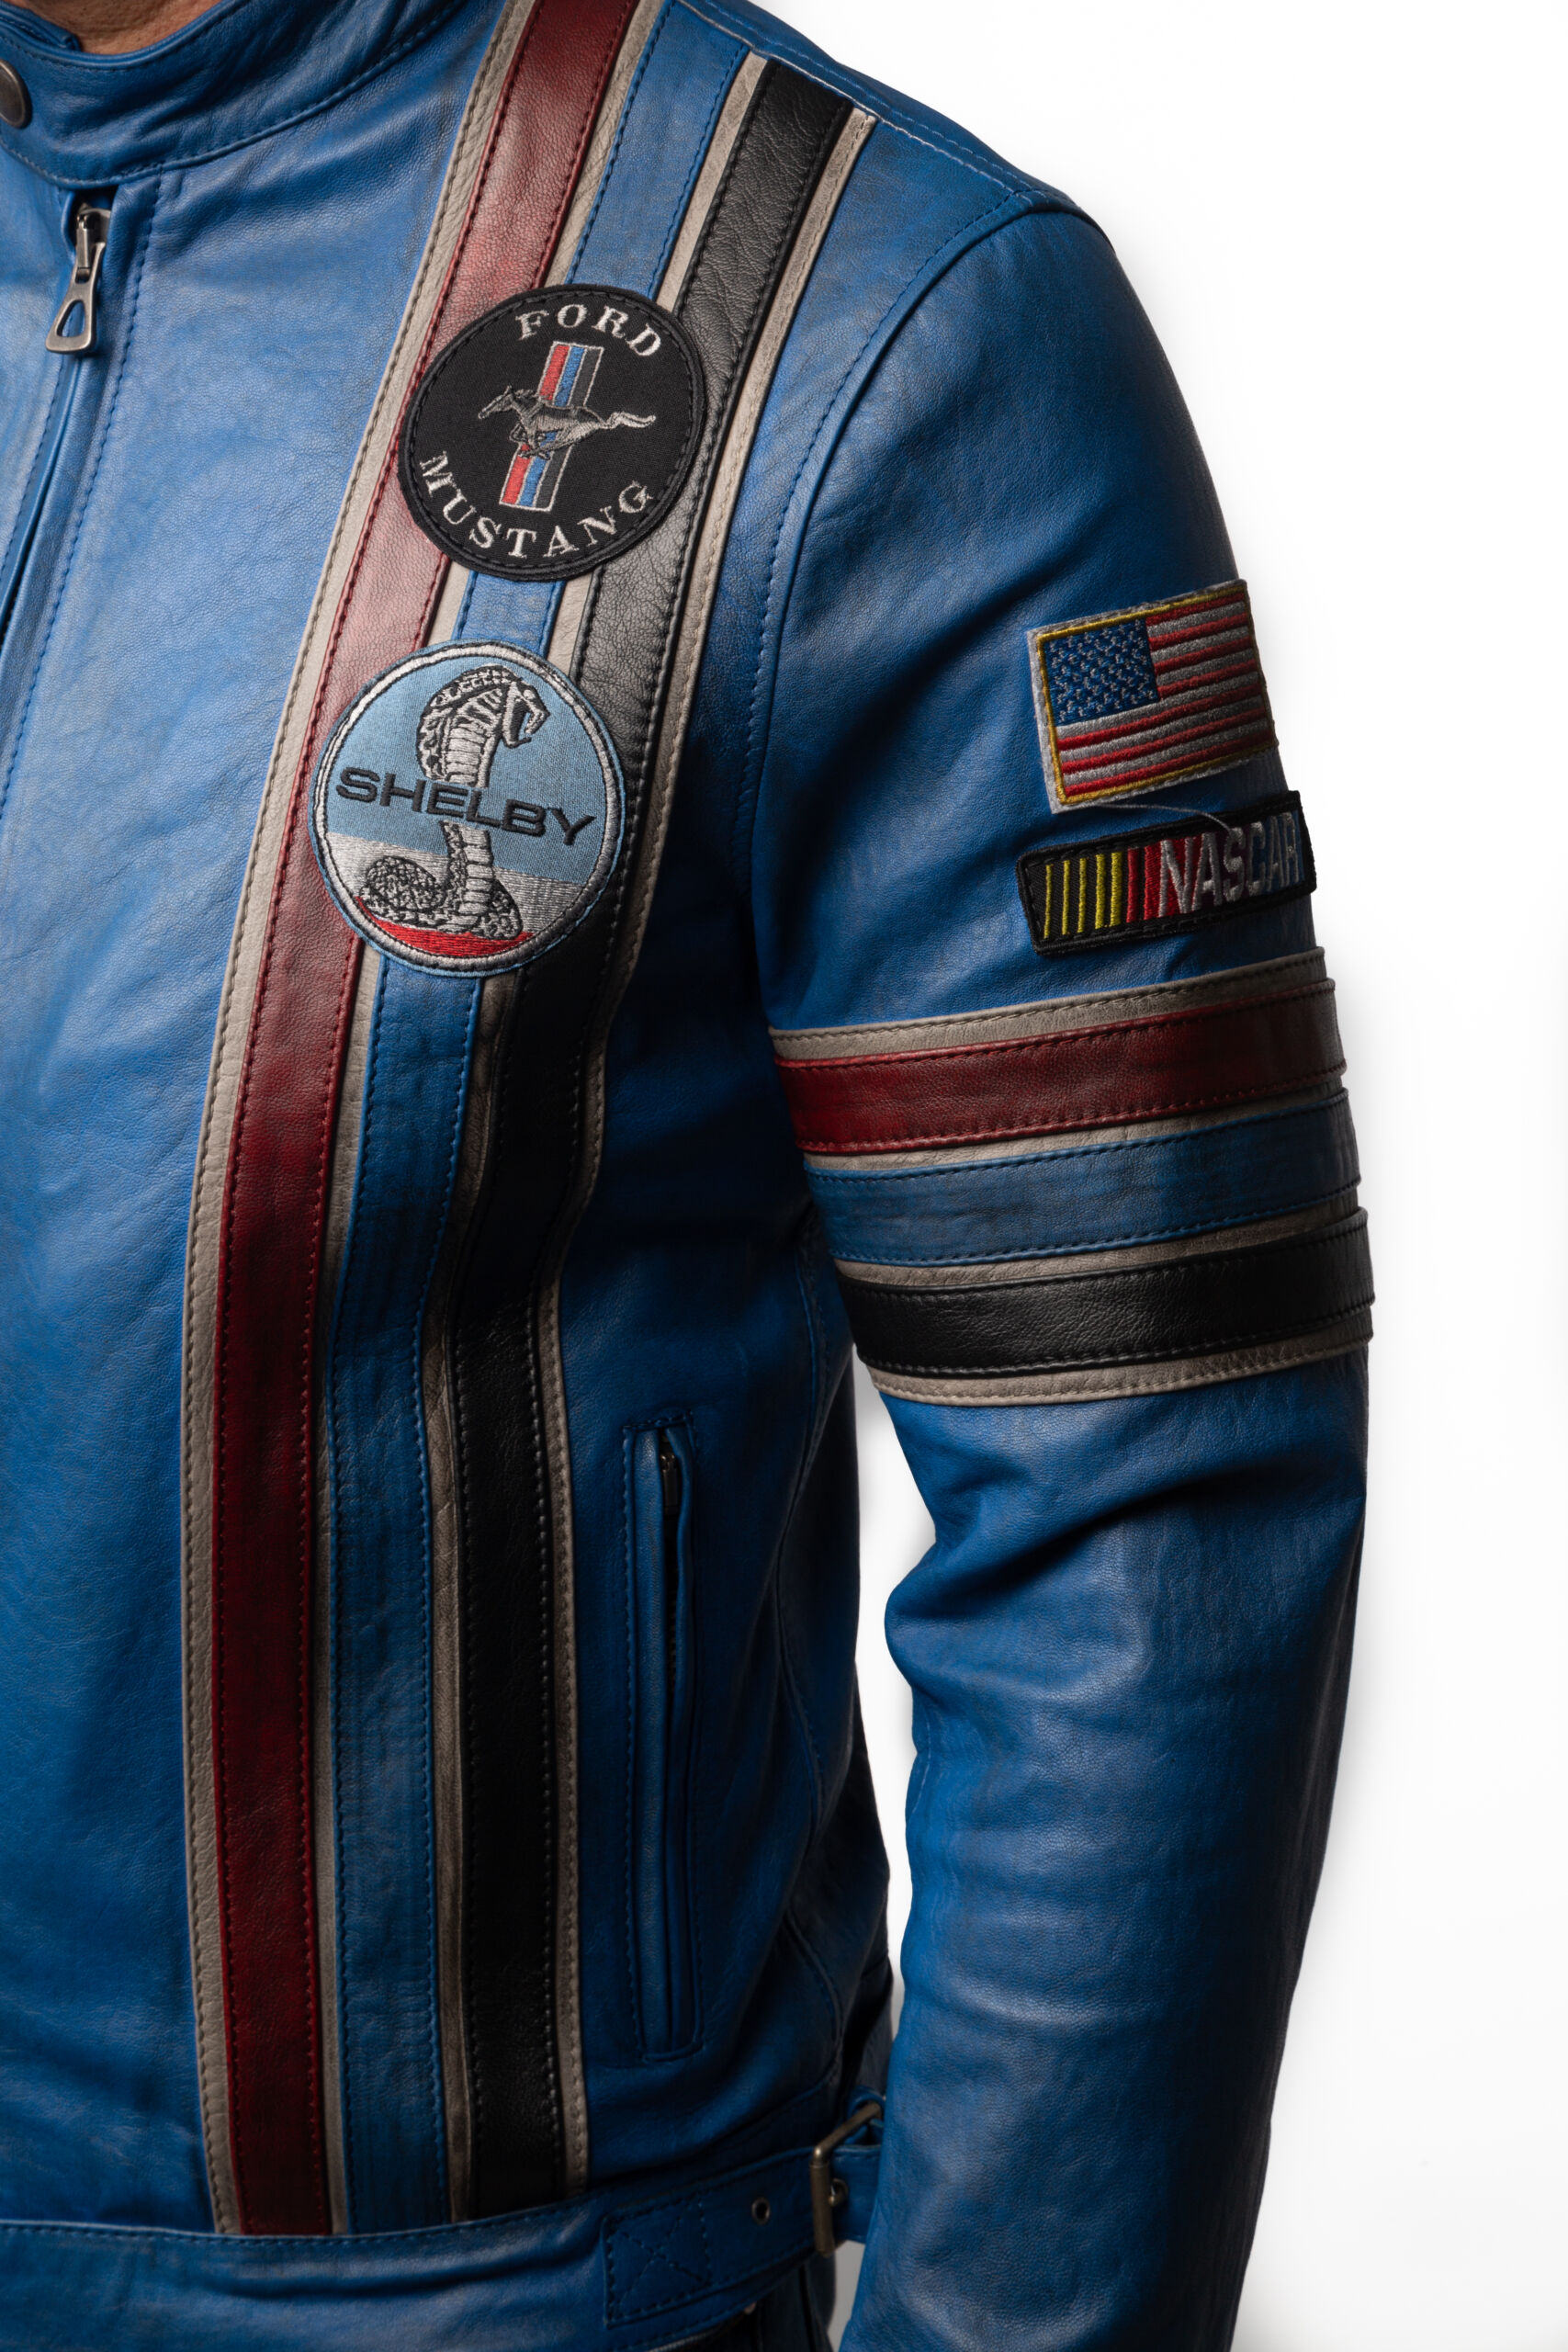 MUSTANG SHELBY Inspired | Black / Blue Tribute - Hollywood Vintage Jacket